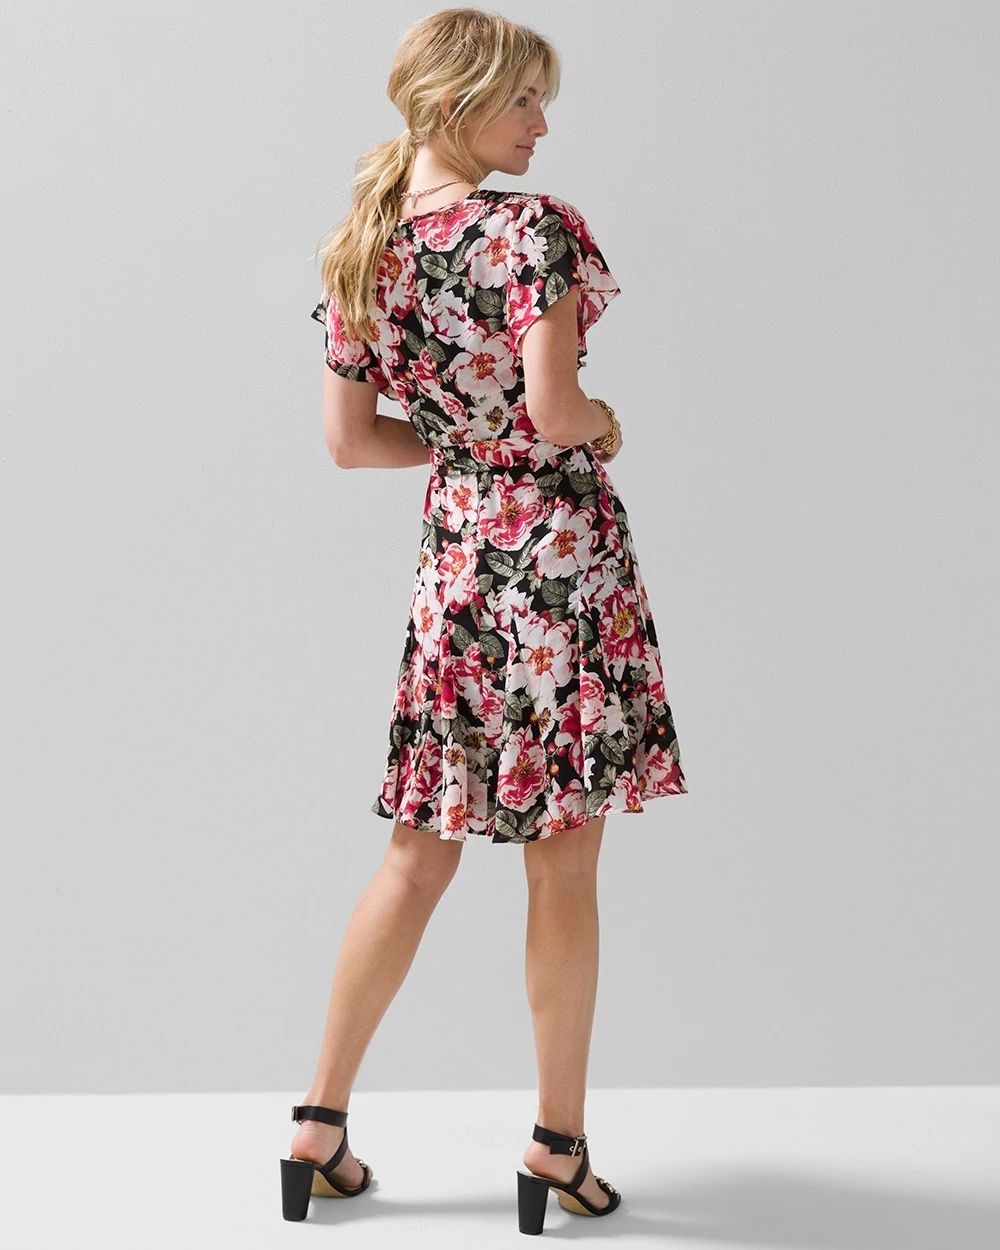 Floral Godet Pleat Dress click to view larger image.